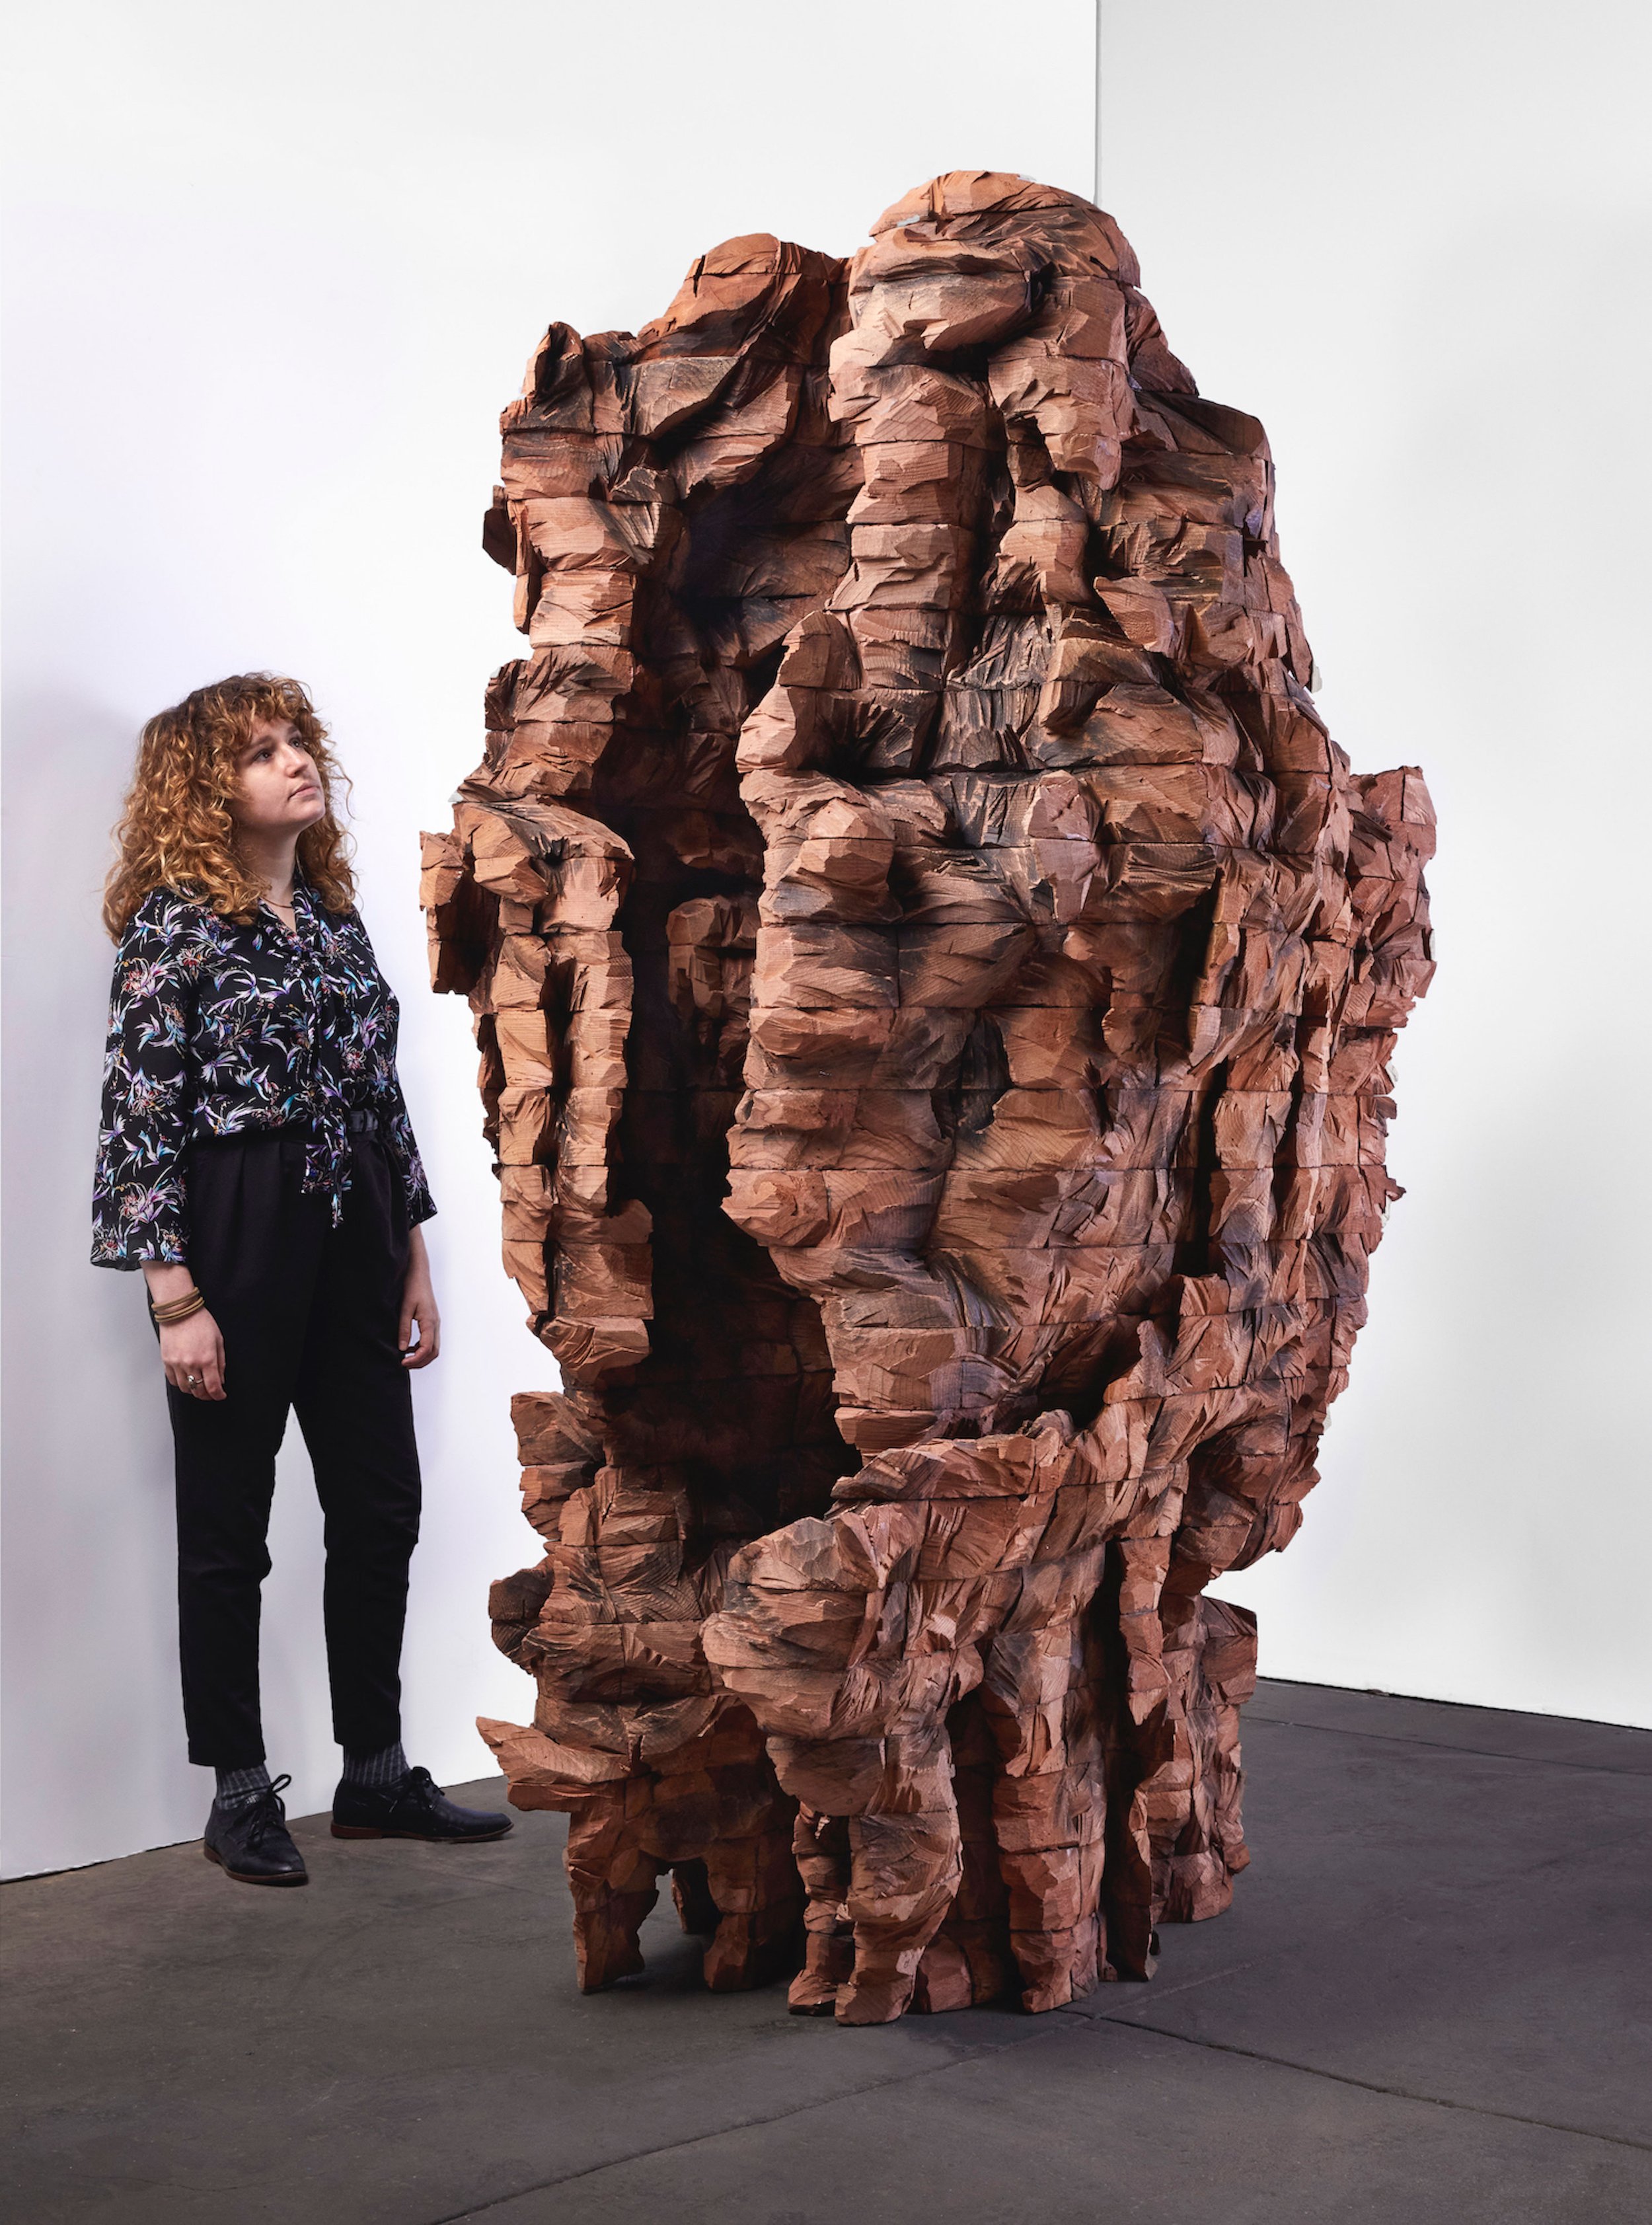  Jak, 2019-2021  Redwood and graphite  83 x 34 x 25.75 in.    MORE IMAGES  